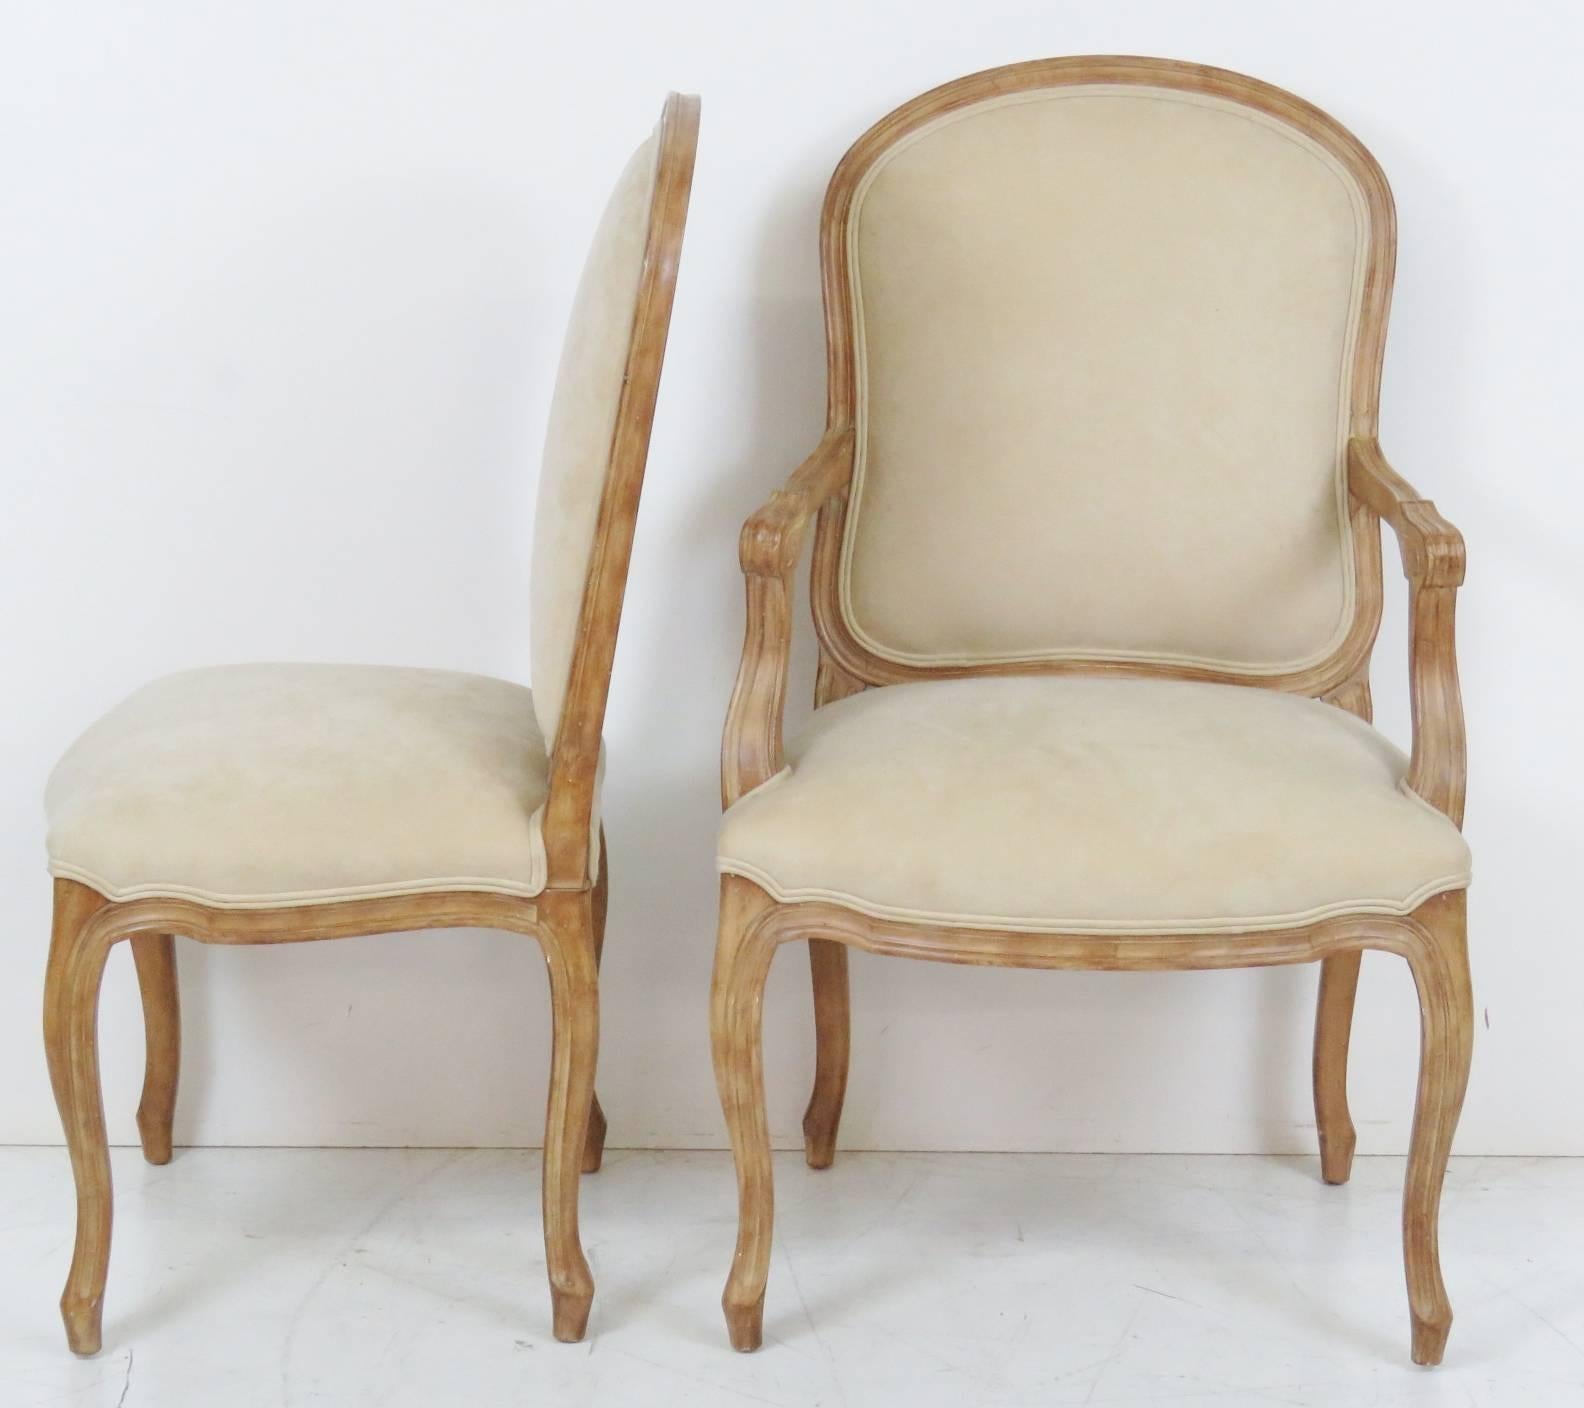 Carved frame with cream upholstered seats and backs. Includes two armchairs and six side chairs.